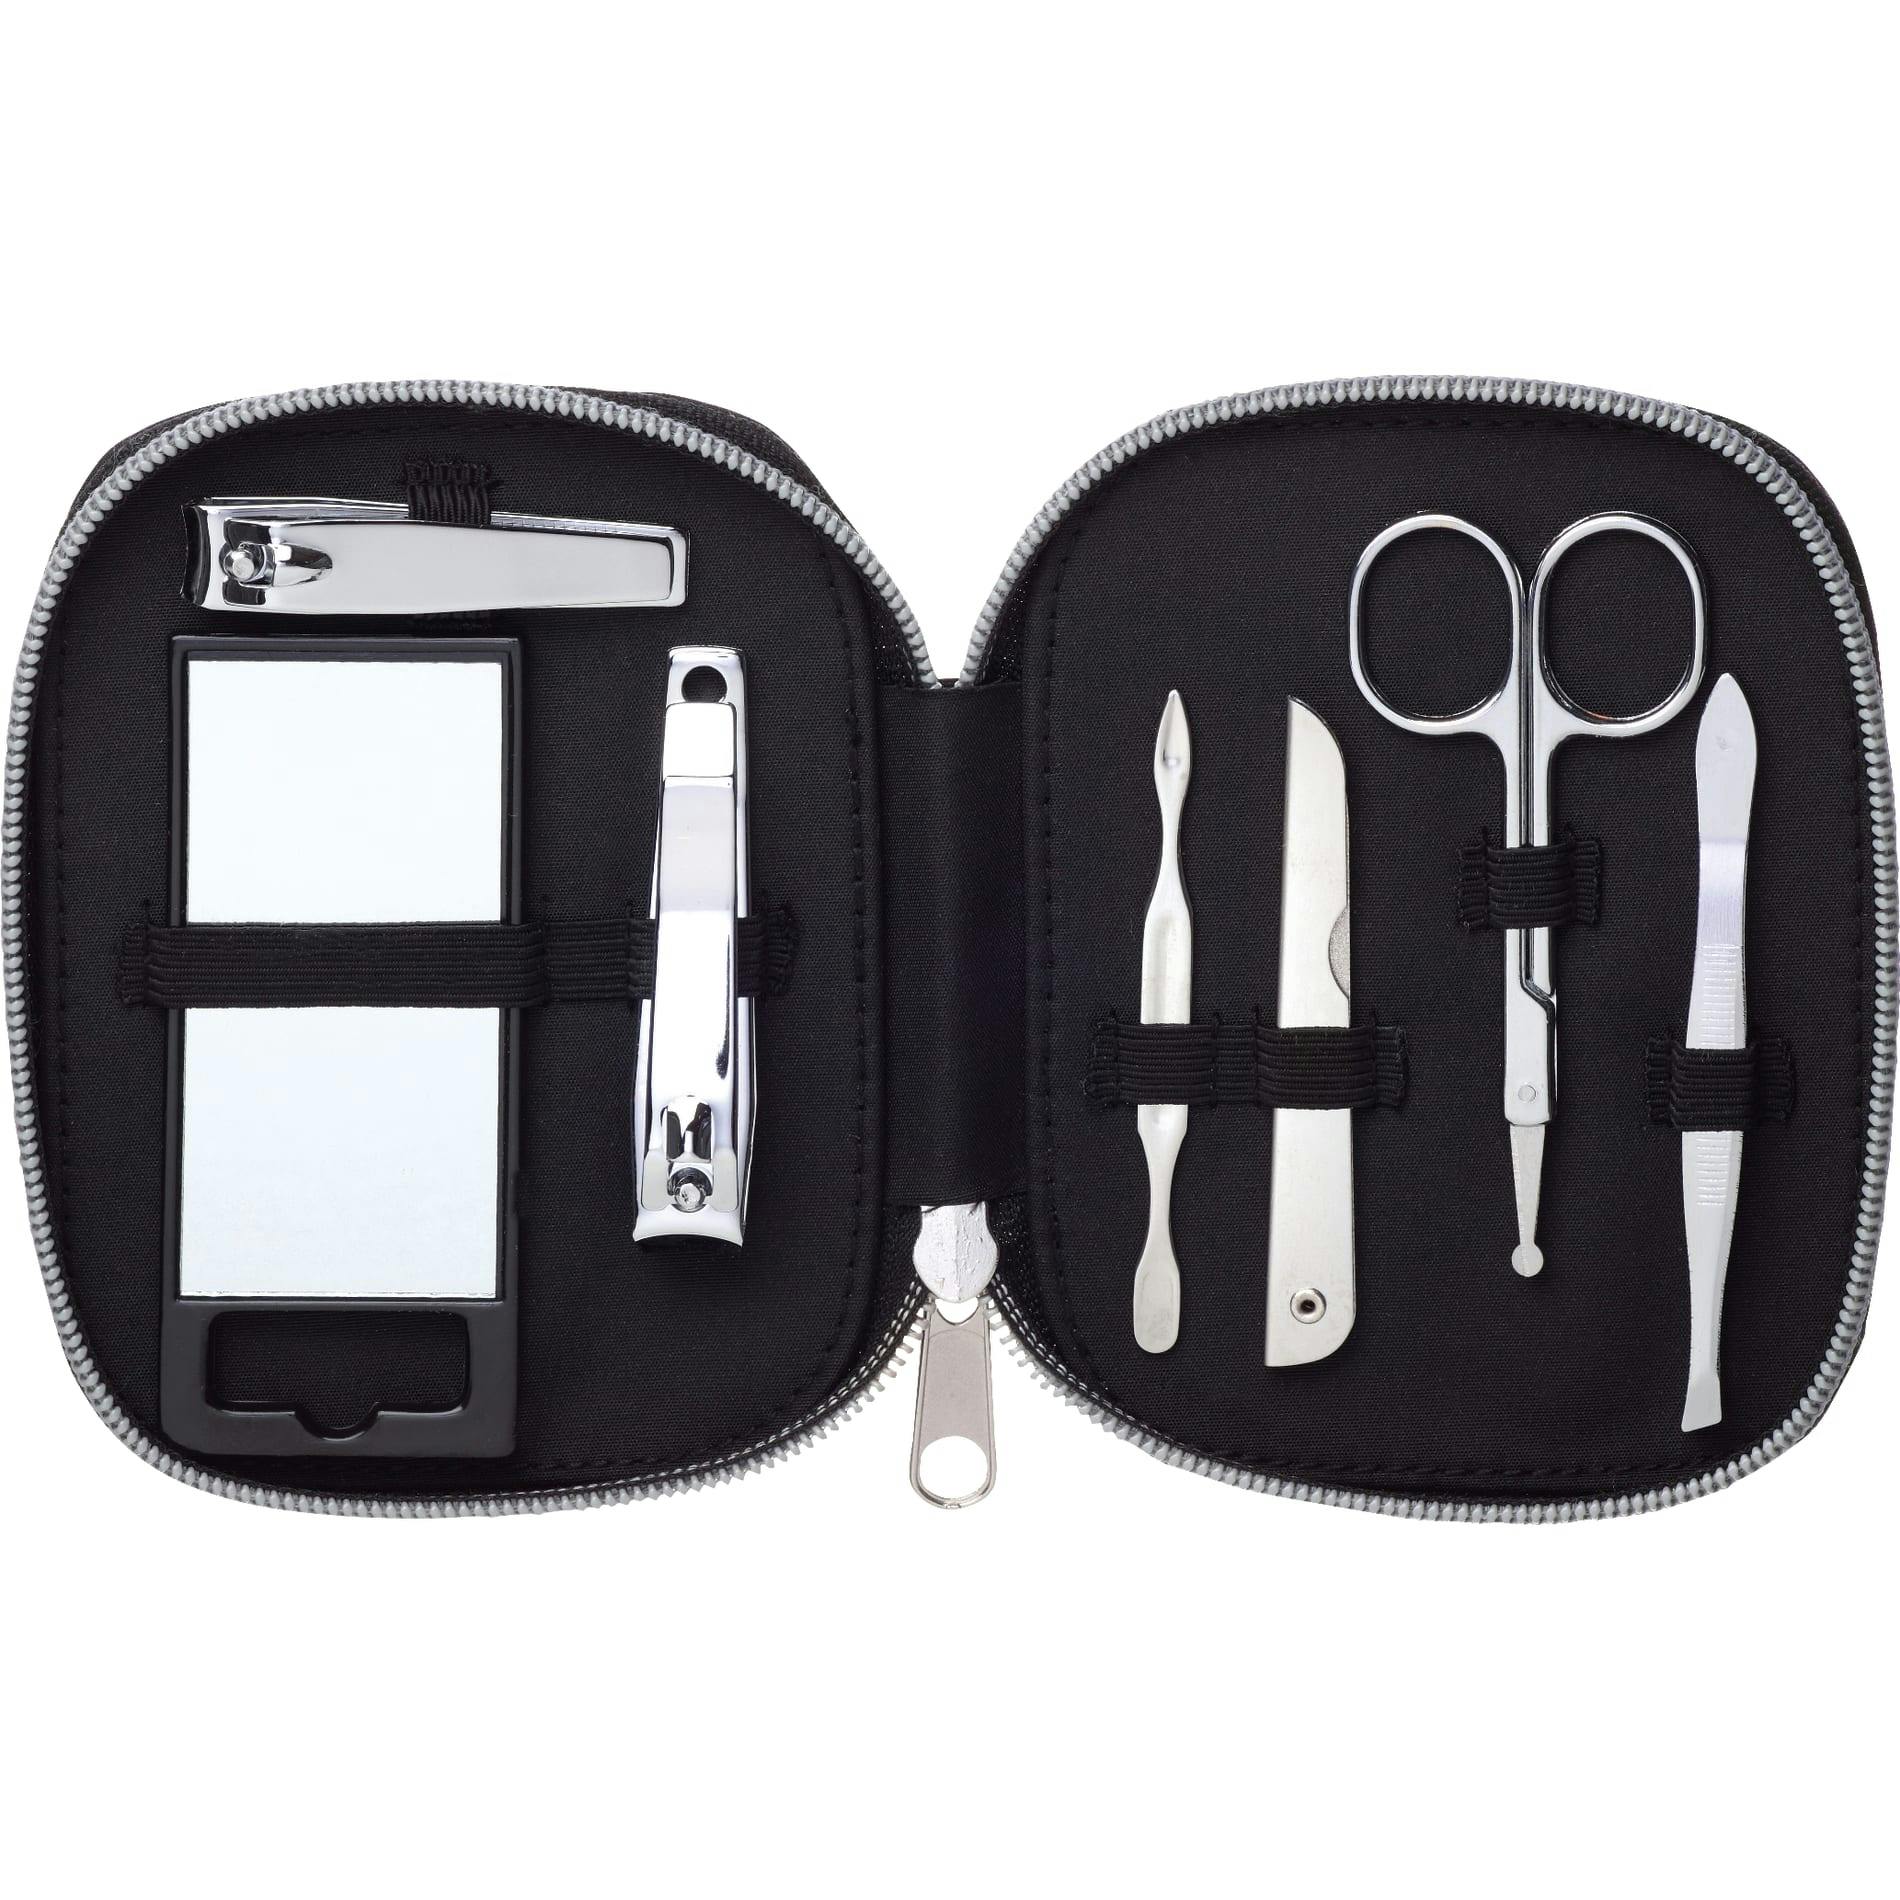 Vanity 7-Piece Personal Care Kit - additional Image 2